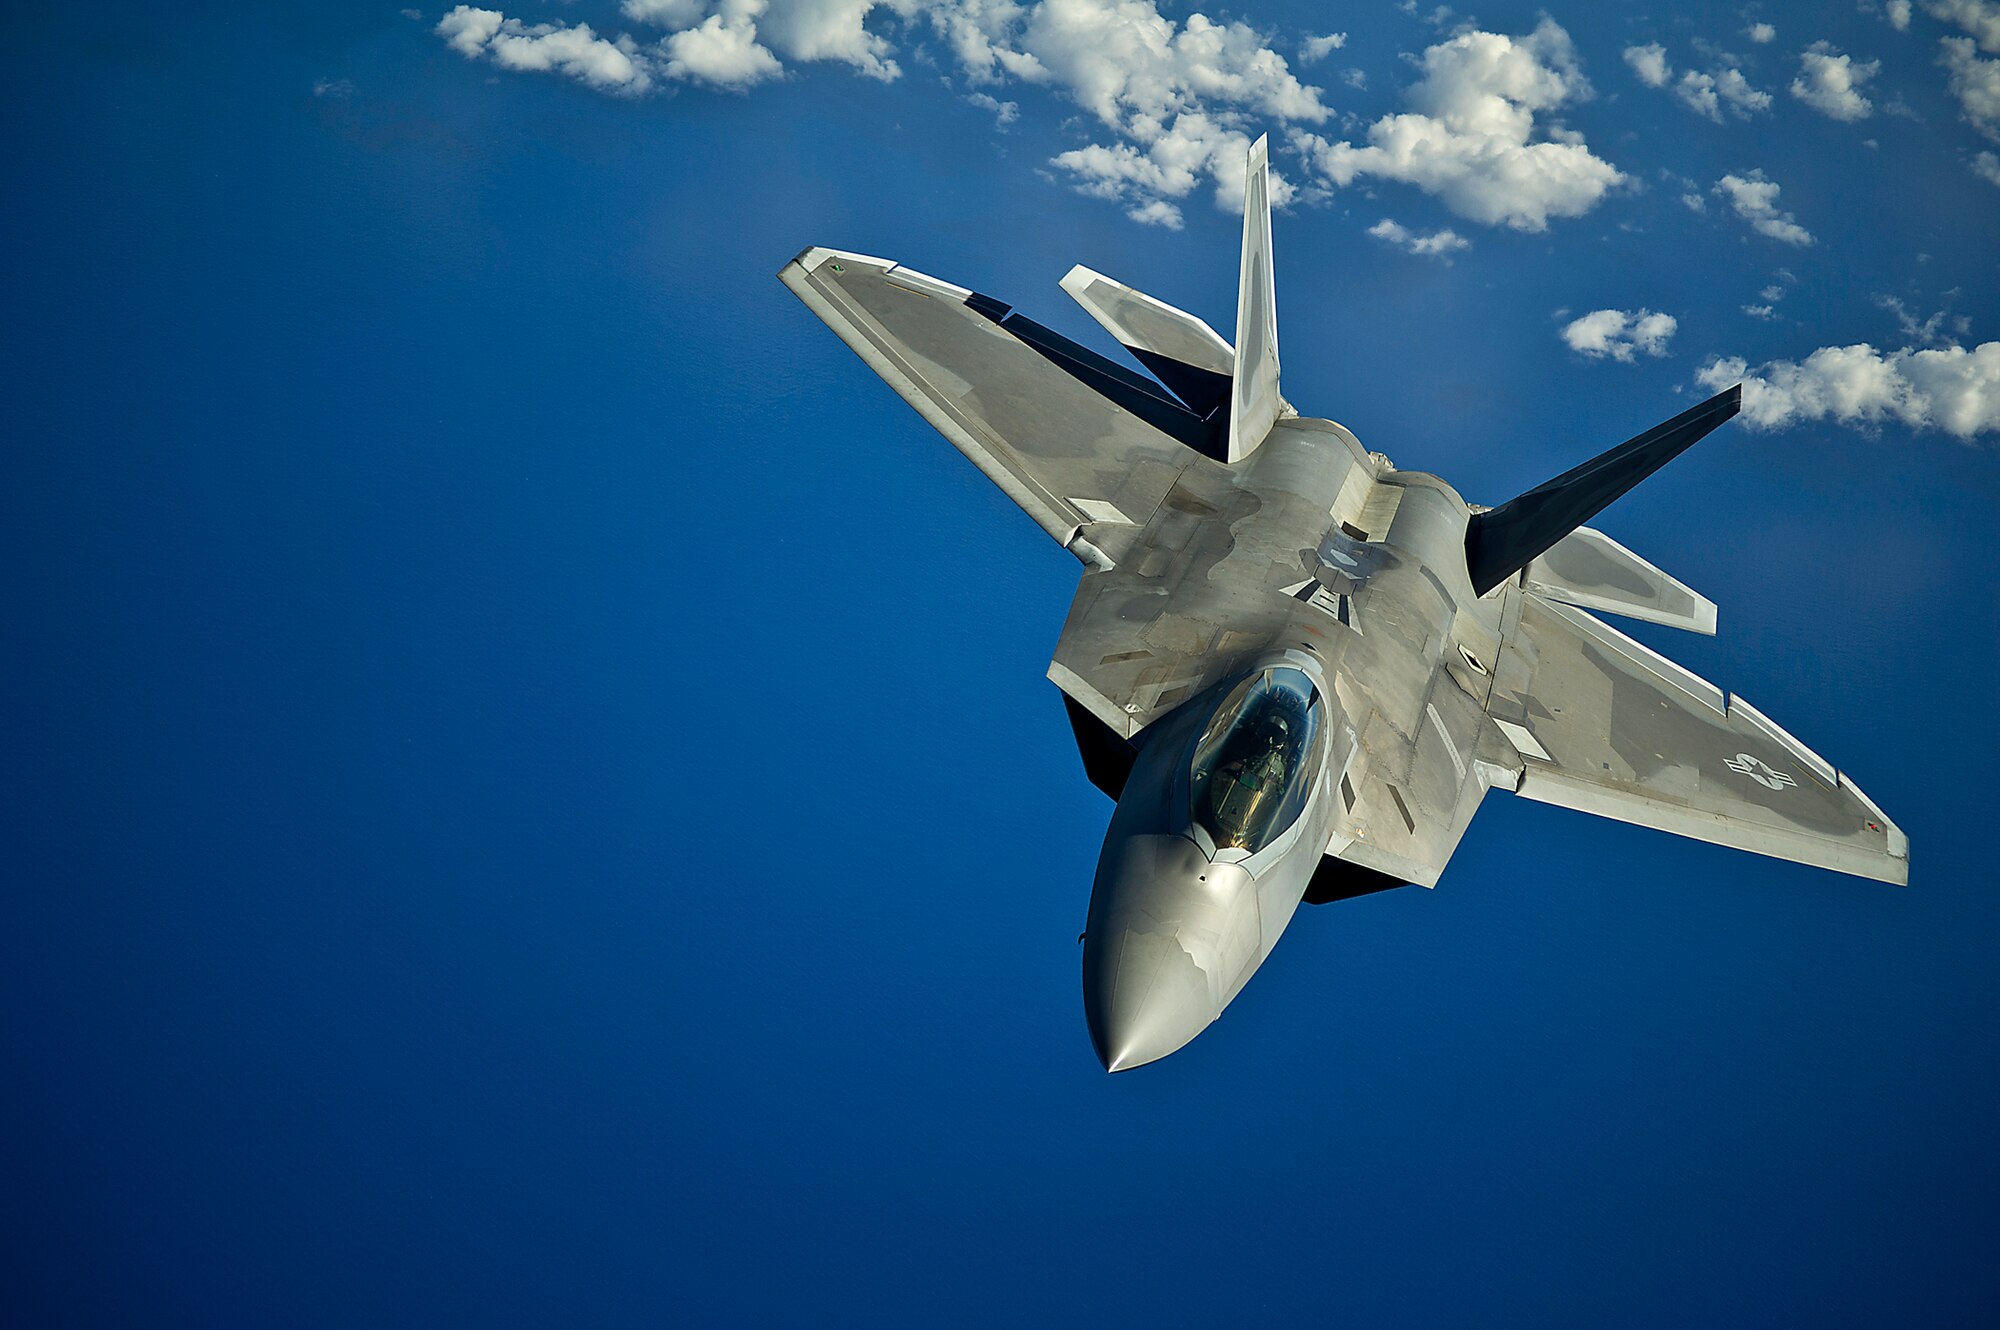 An F-22 Raptor from the Hawaii Air National Guard’s 199th Fighter Squadron returns to a training mission after refueling March 27, 2012, over the Pacific Ocean near the Hawaiian Islands. During the training, U.S. Air Force Academy cadets received a familiarization flight to get a better understanding of the Air Force's global reach capabilities. (U.S. Air Force photo/Tech. Sgt. Michael Holzworth)